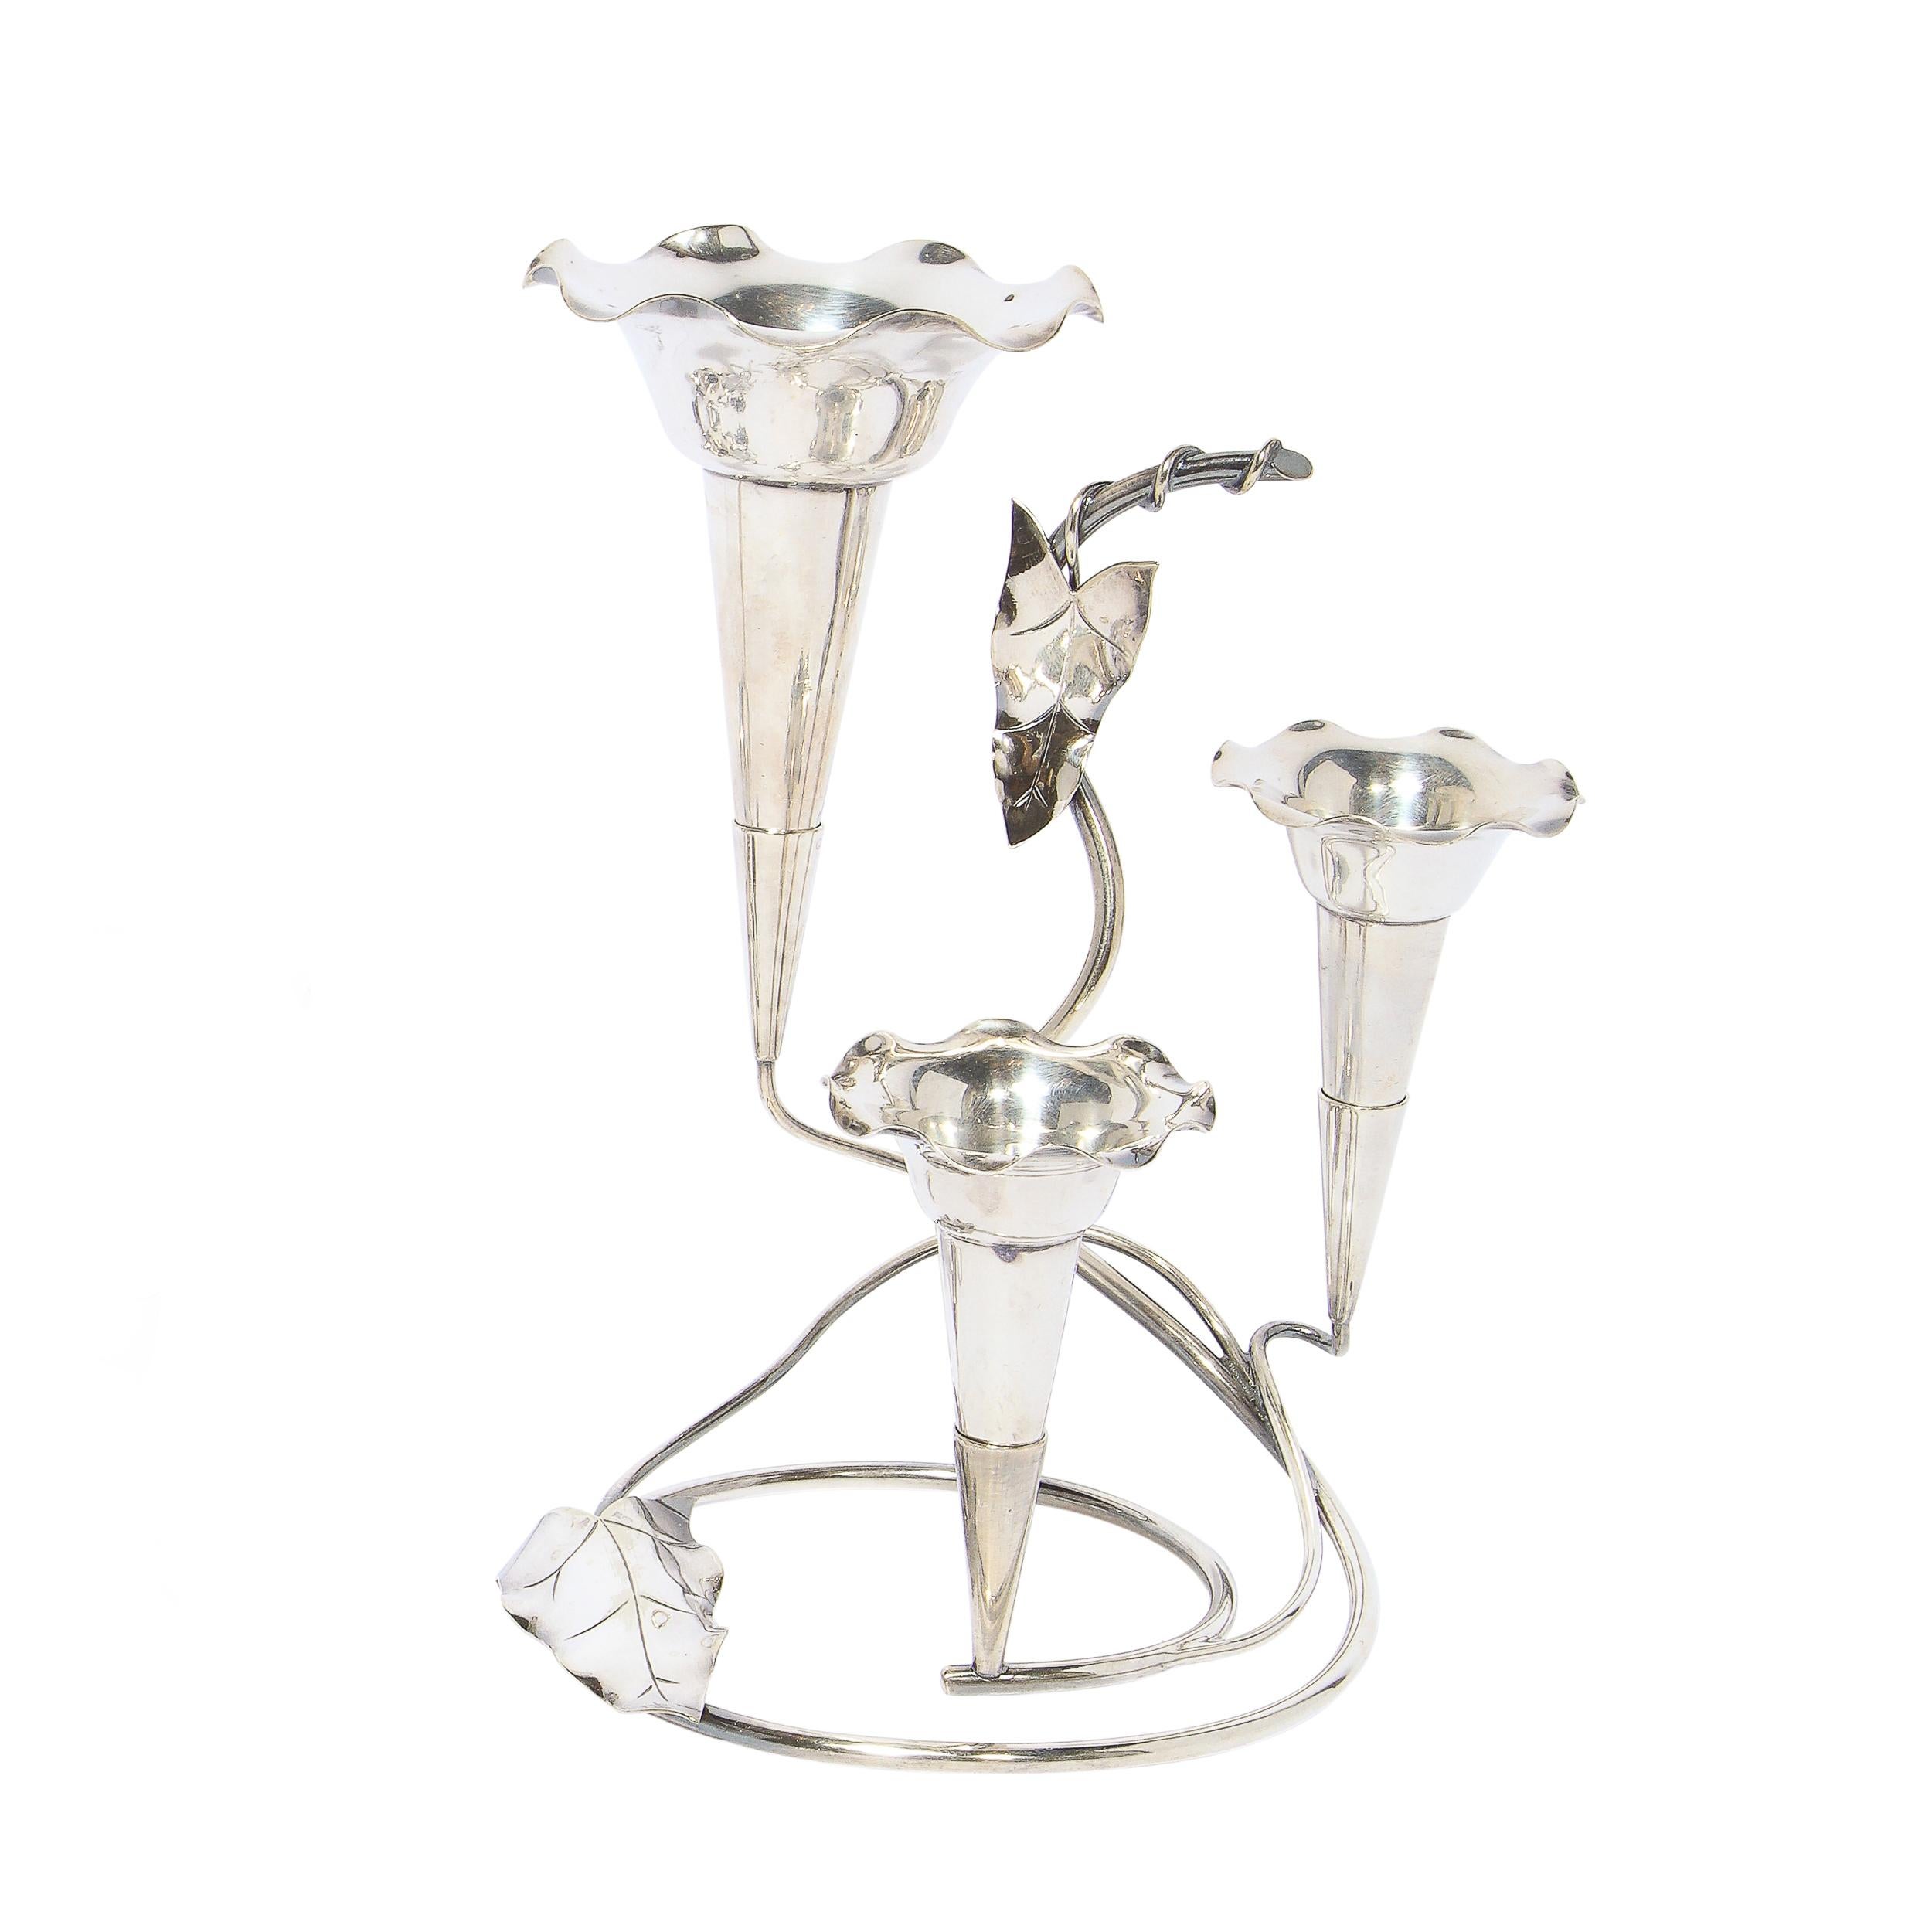 This stunning and graphic pair of Art Nouveau candleholders were realized in the United Kingdom circa 1905. The larger features three trumpet candleholders each with swirling bases and stylized foliate detailing suggesting morning glory leaves and